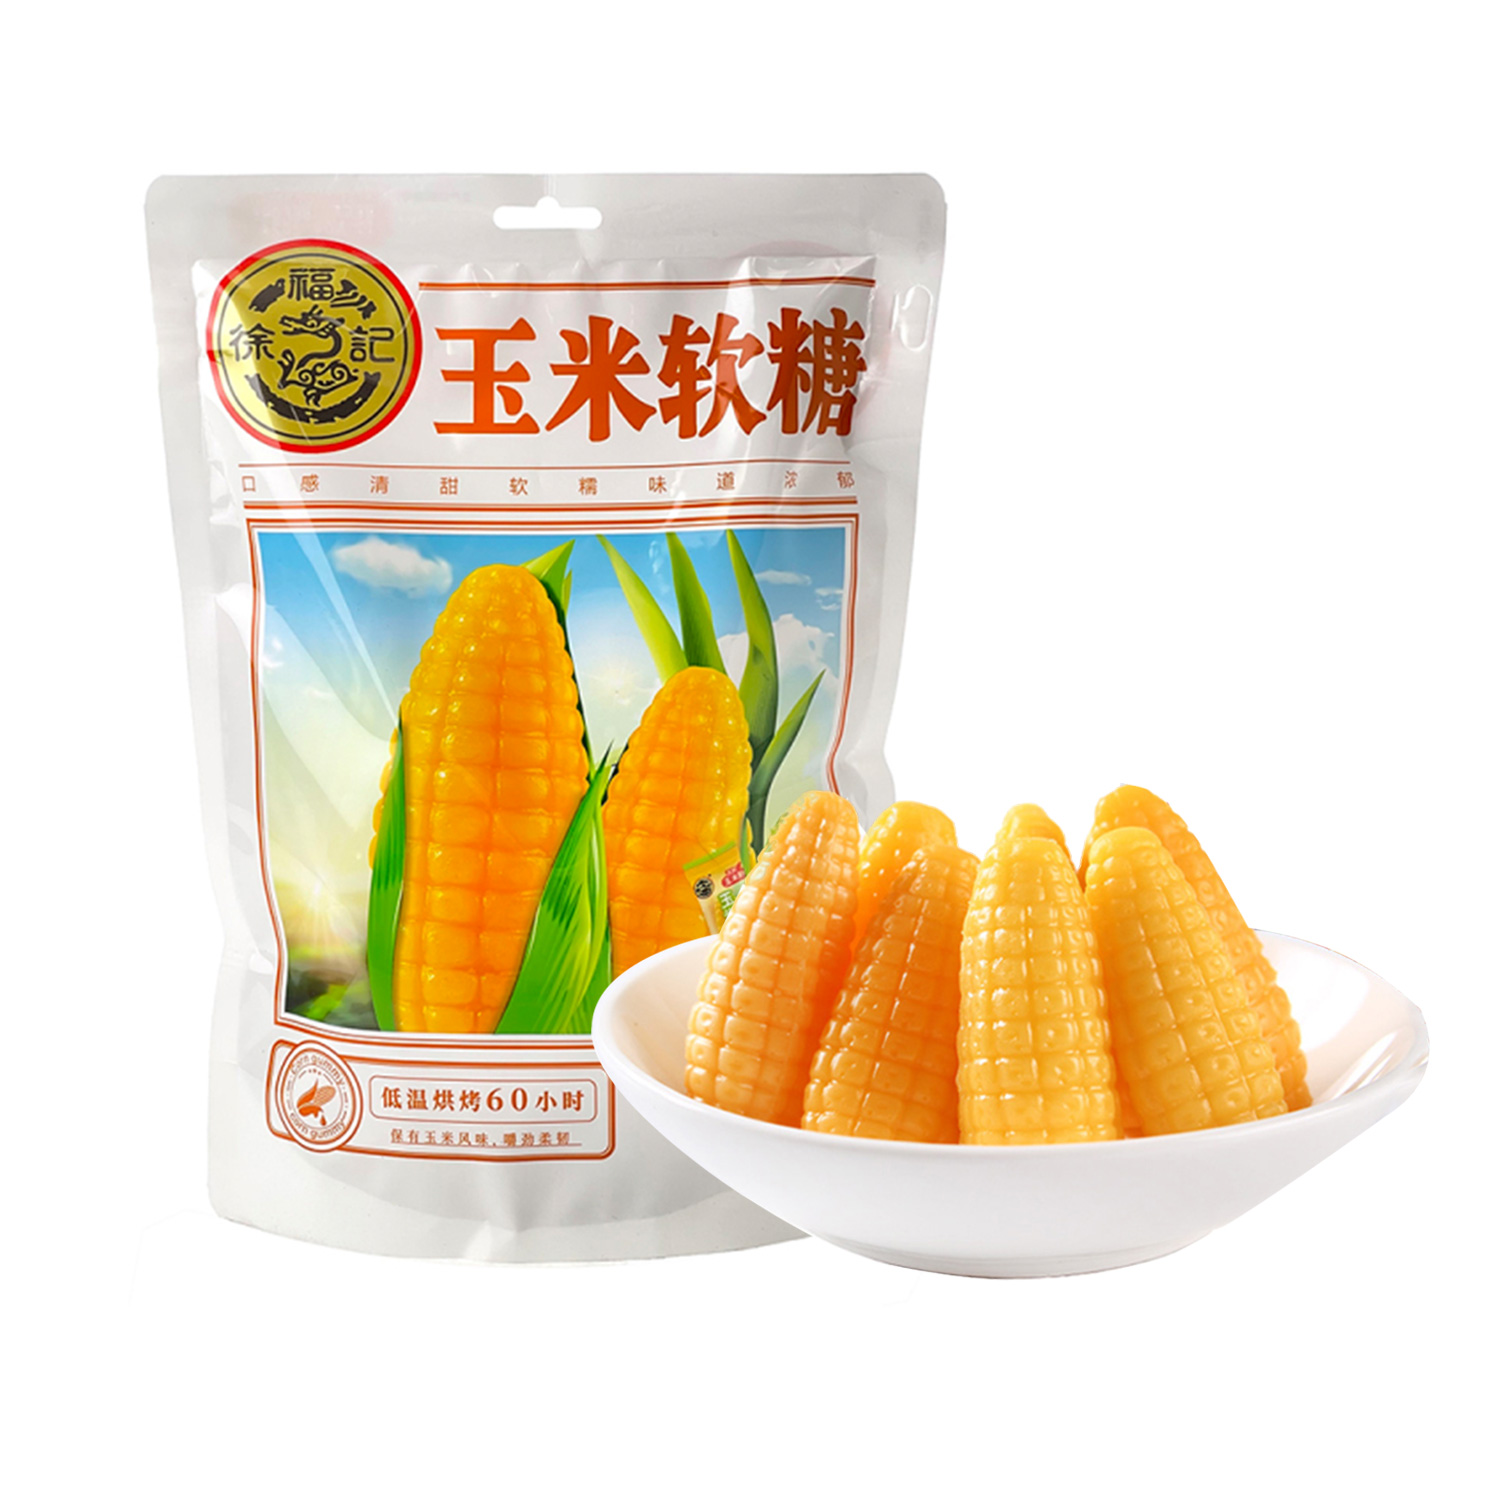 Hsu Fu Chi Butter Corn Candy 375g-eBest-Confectionery,Snacks & Confectionery